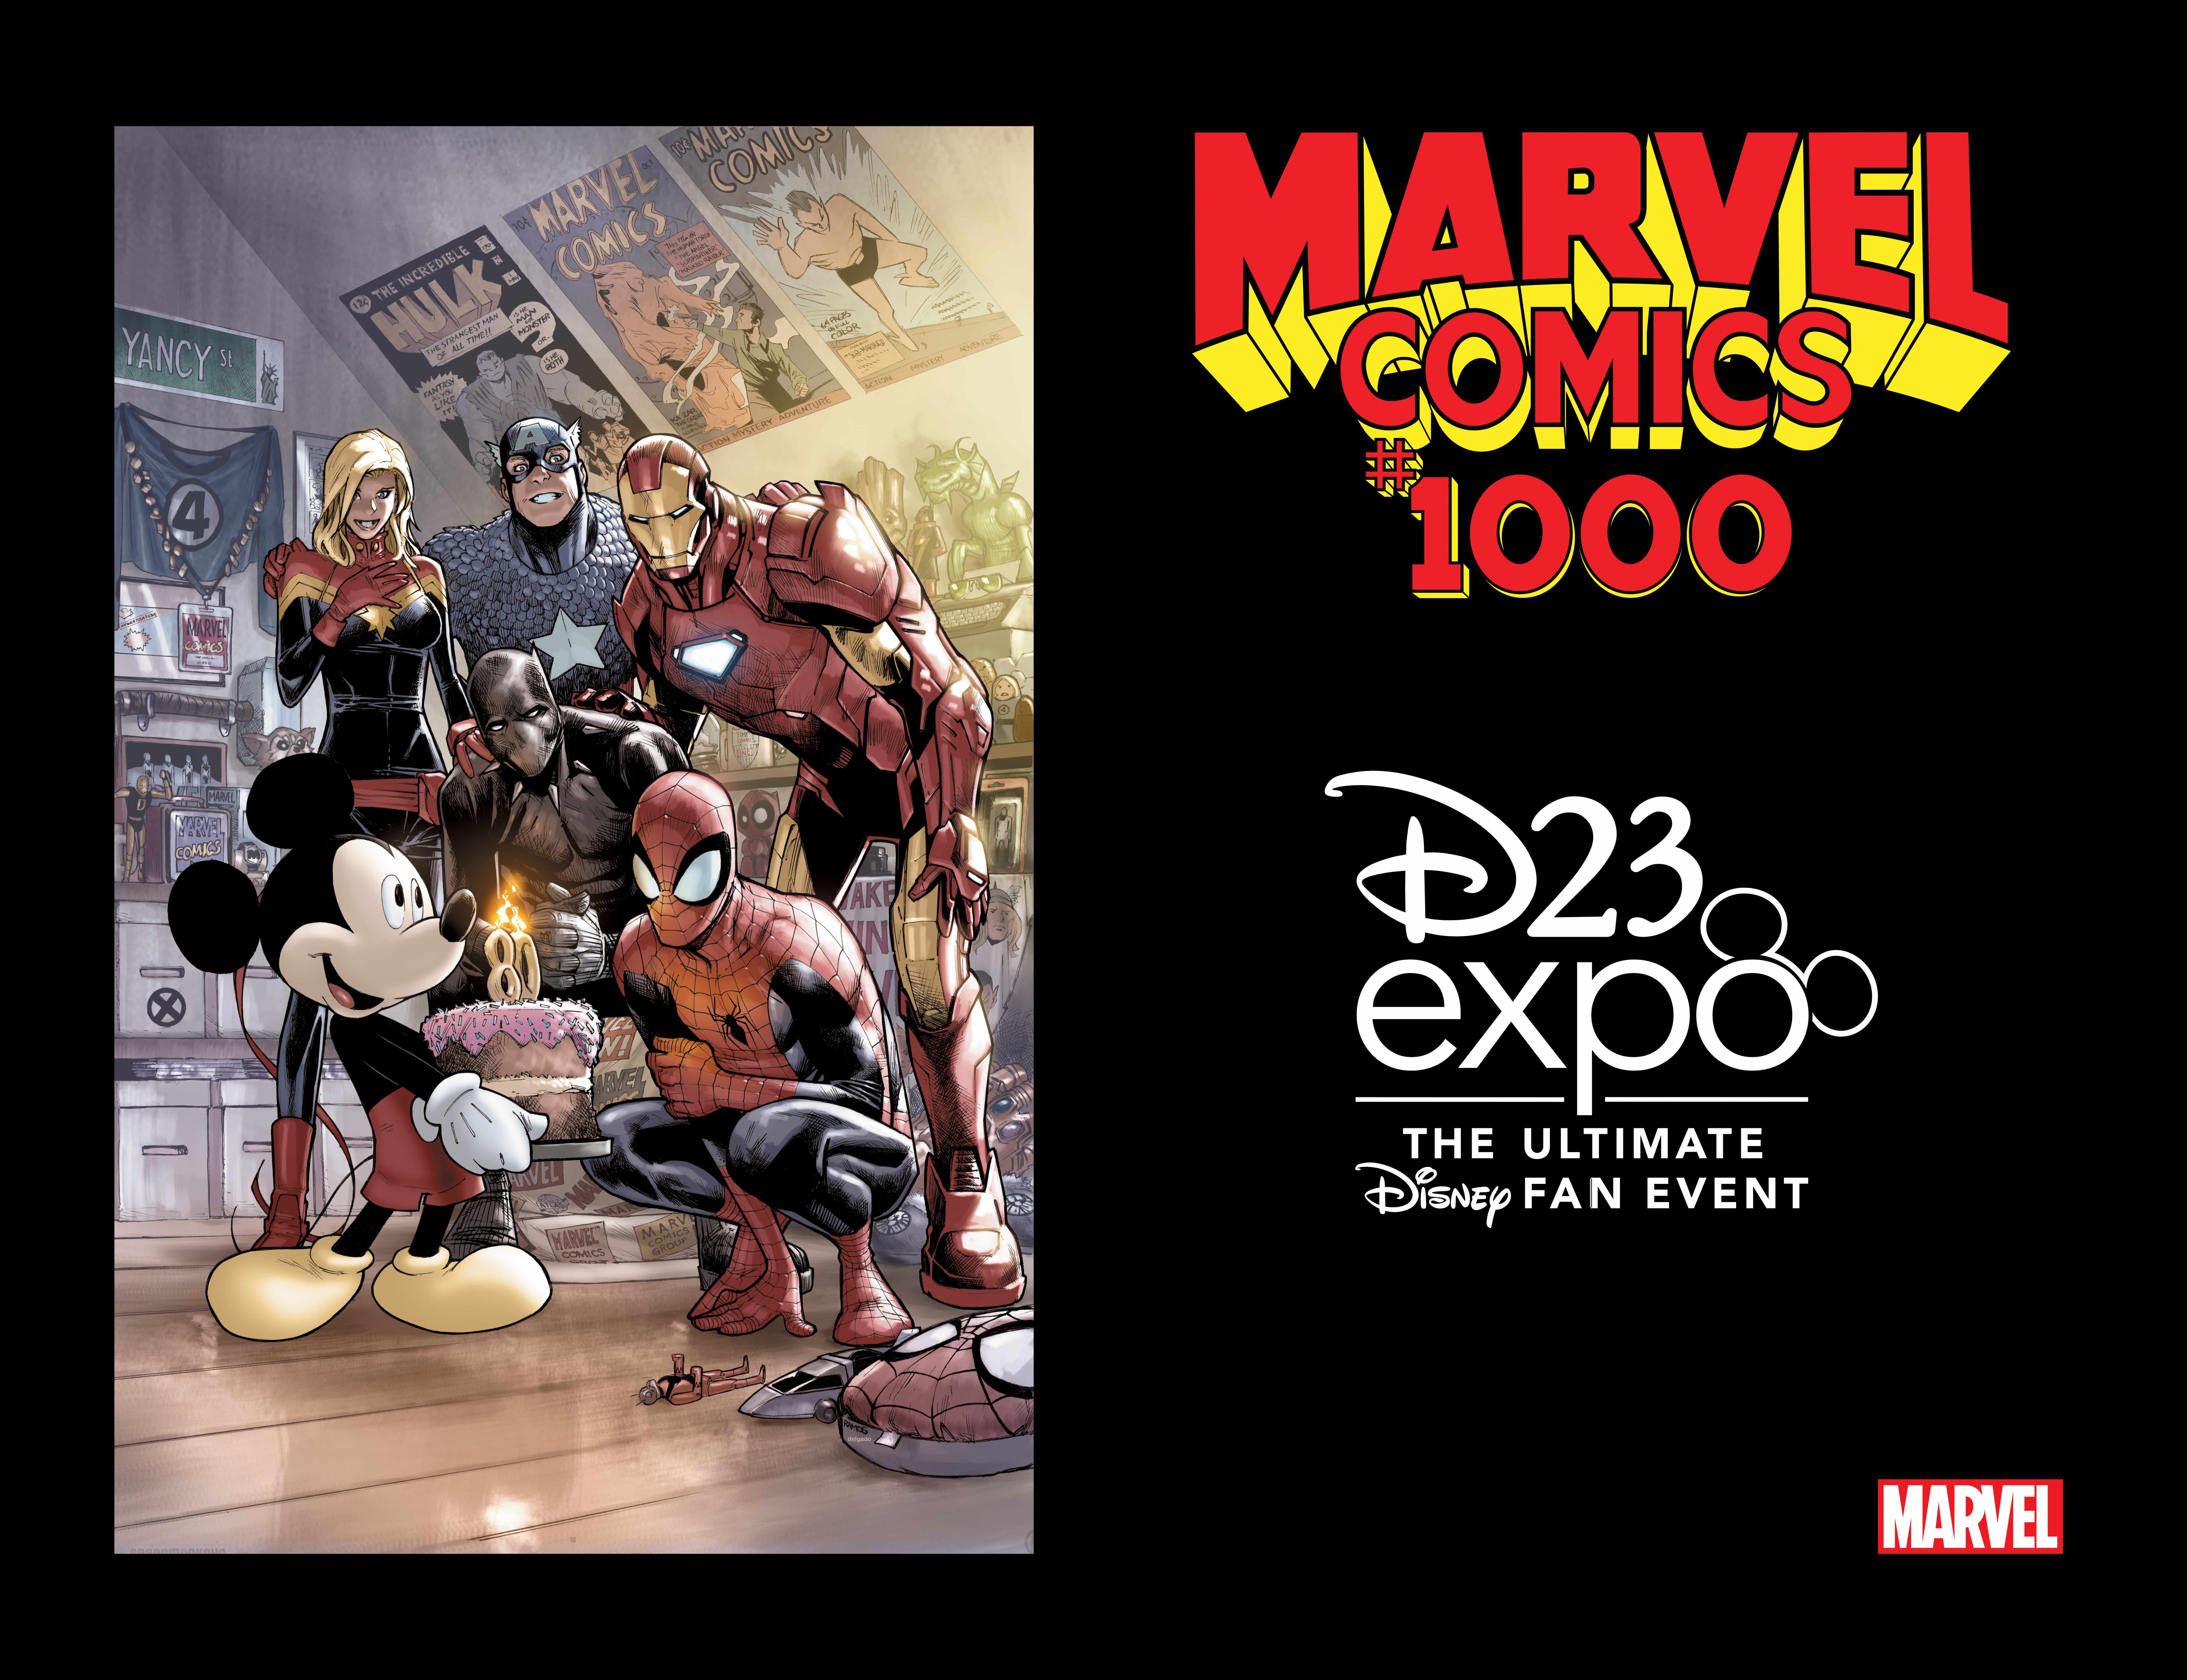 Marvel Comics News Digest With Info on How to Get an Exclusive D23 Marvel Comics #1000